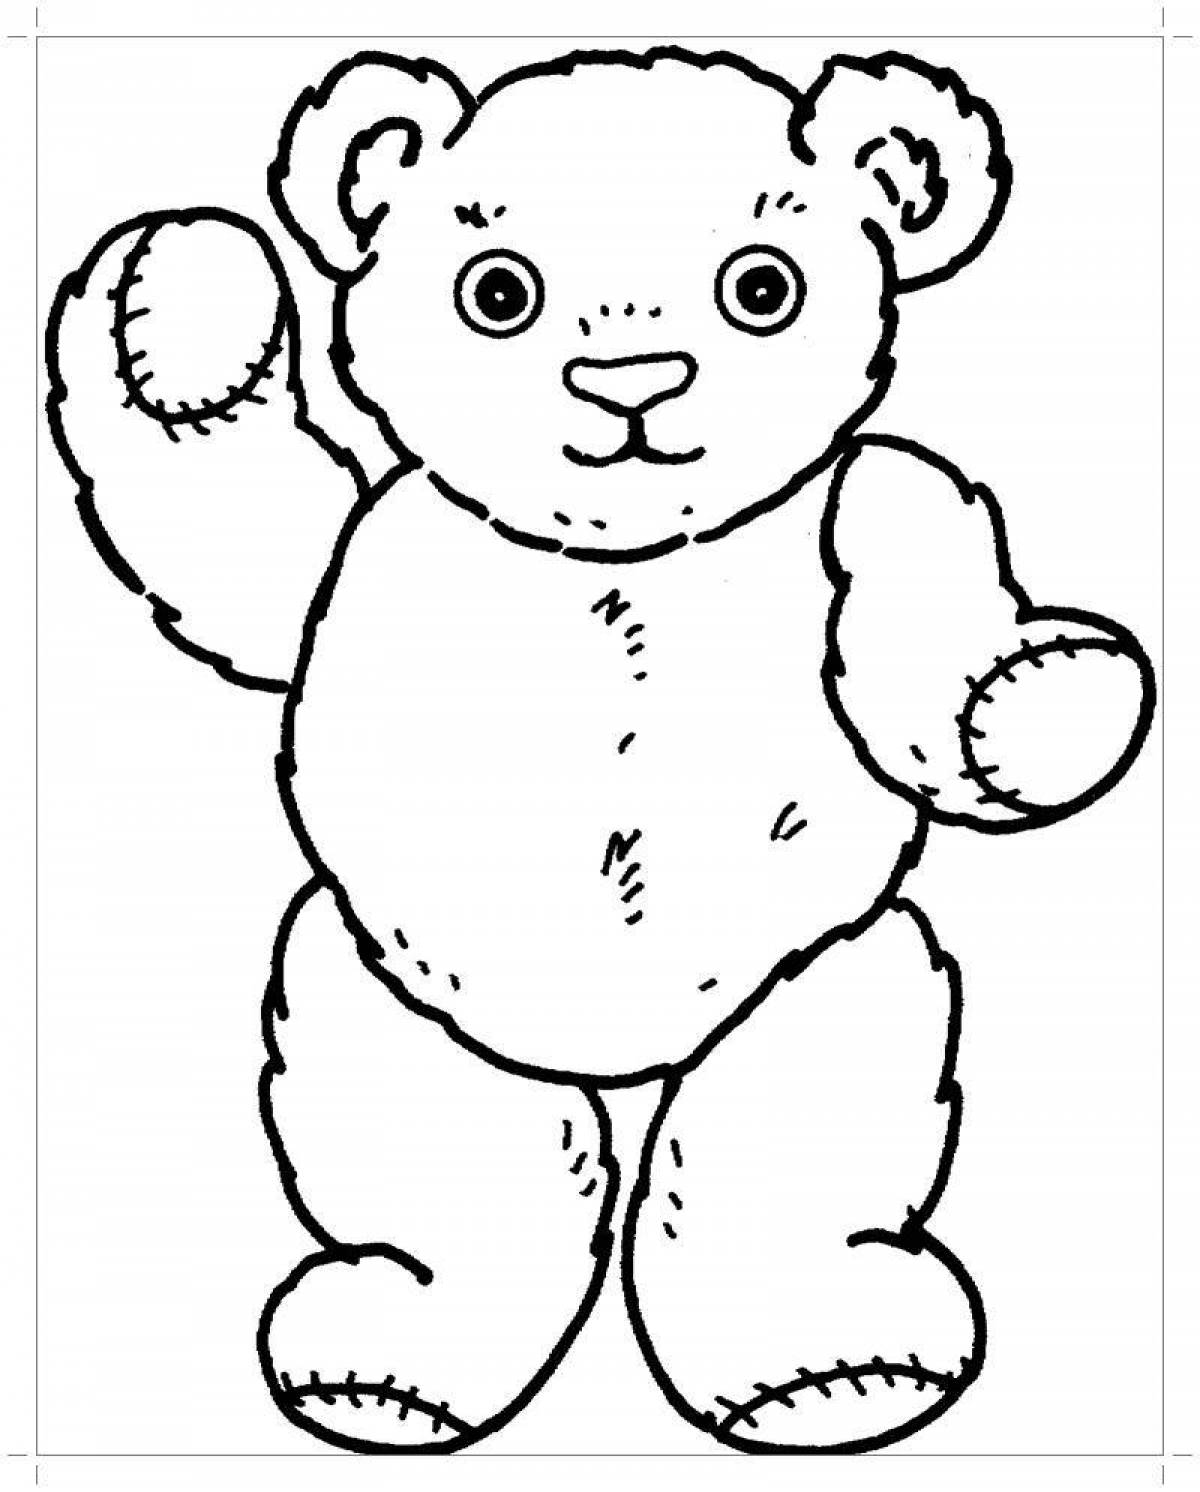 Cute clumsy bear coloring book